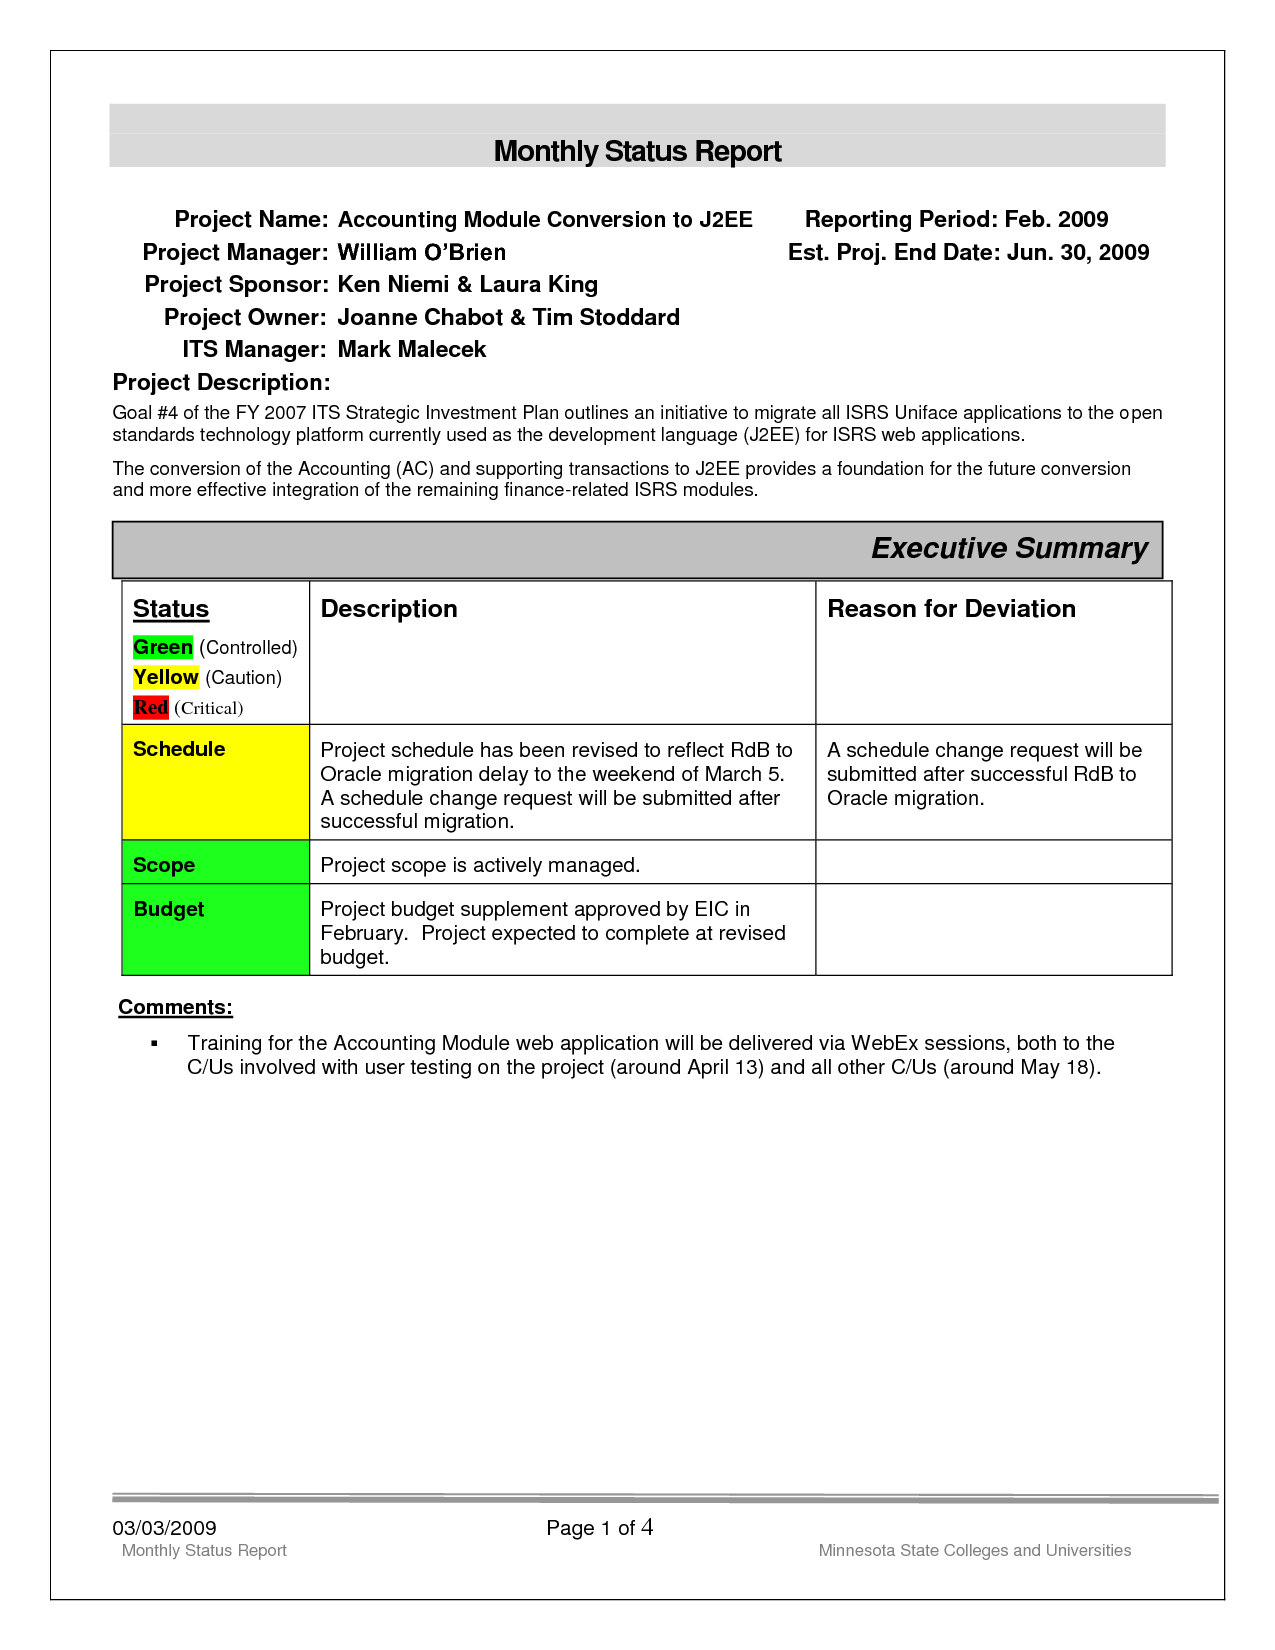 Replacethis] Monthly Status Report Template Format And In Project Monthly Status Report Template